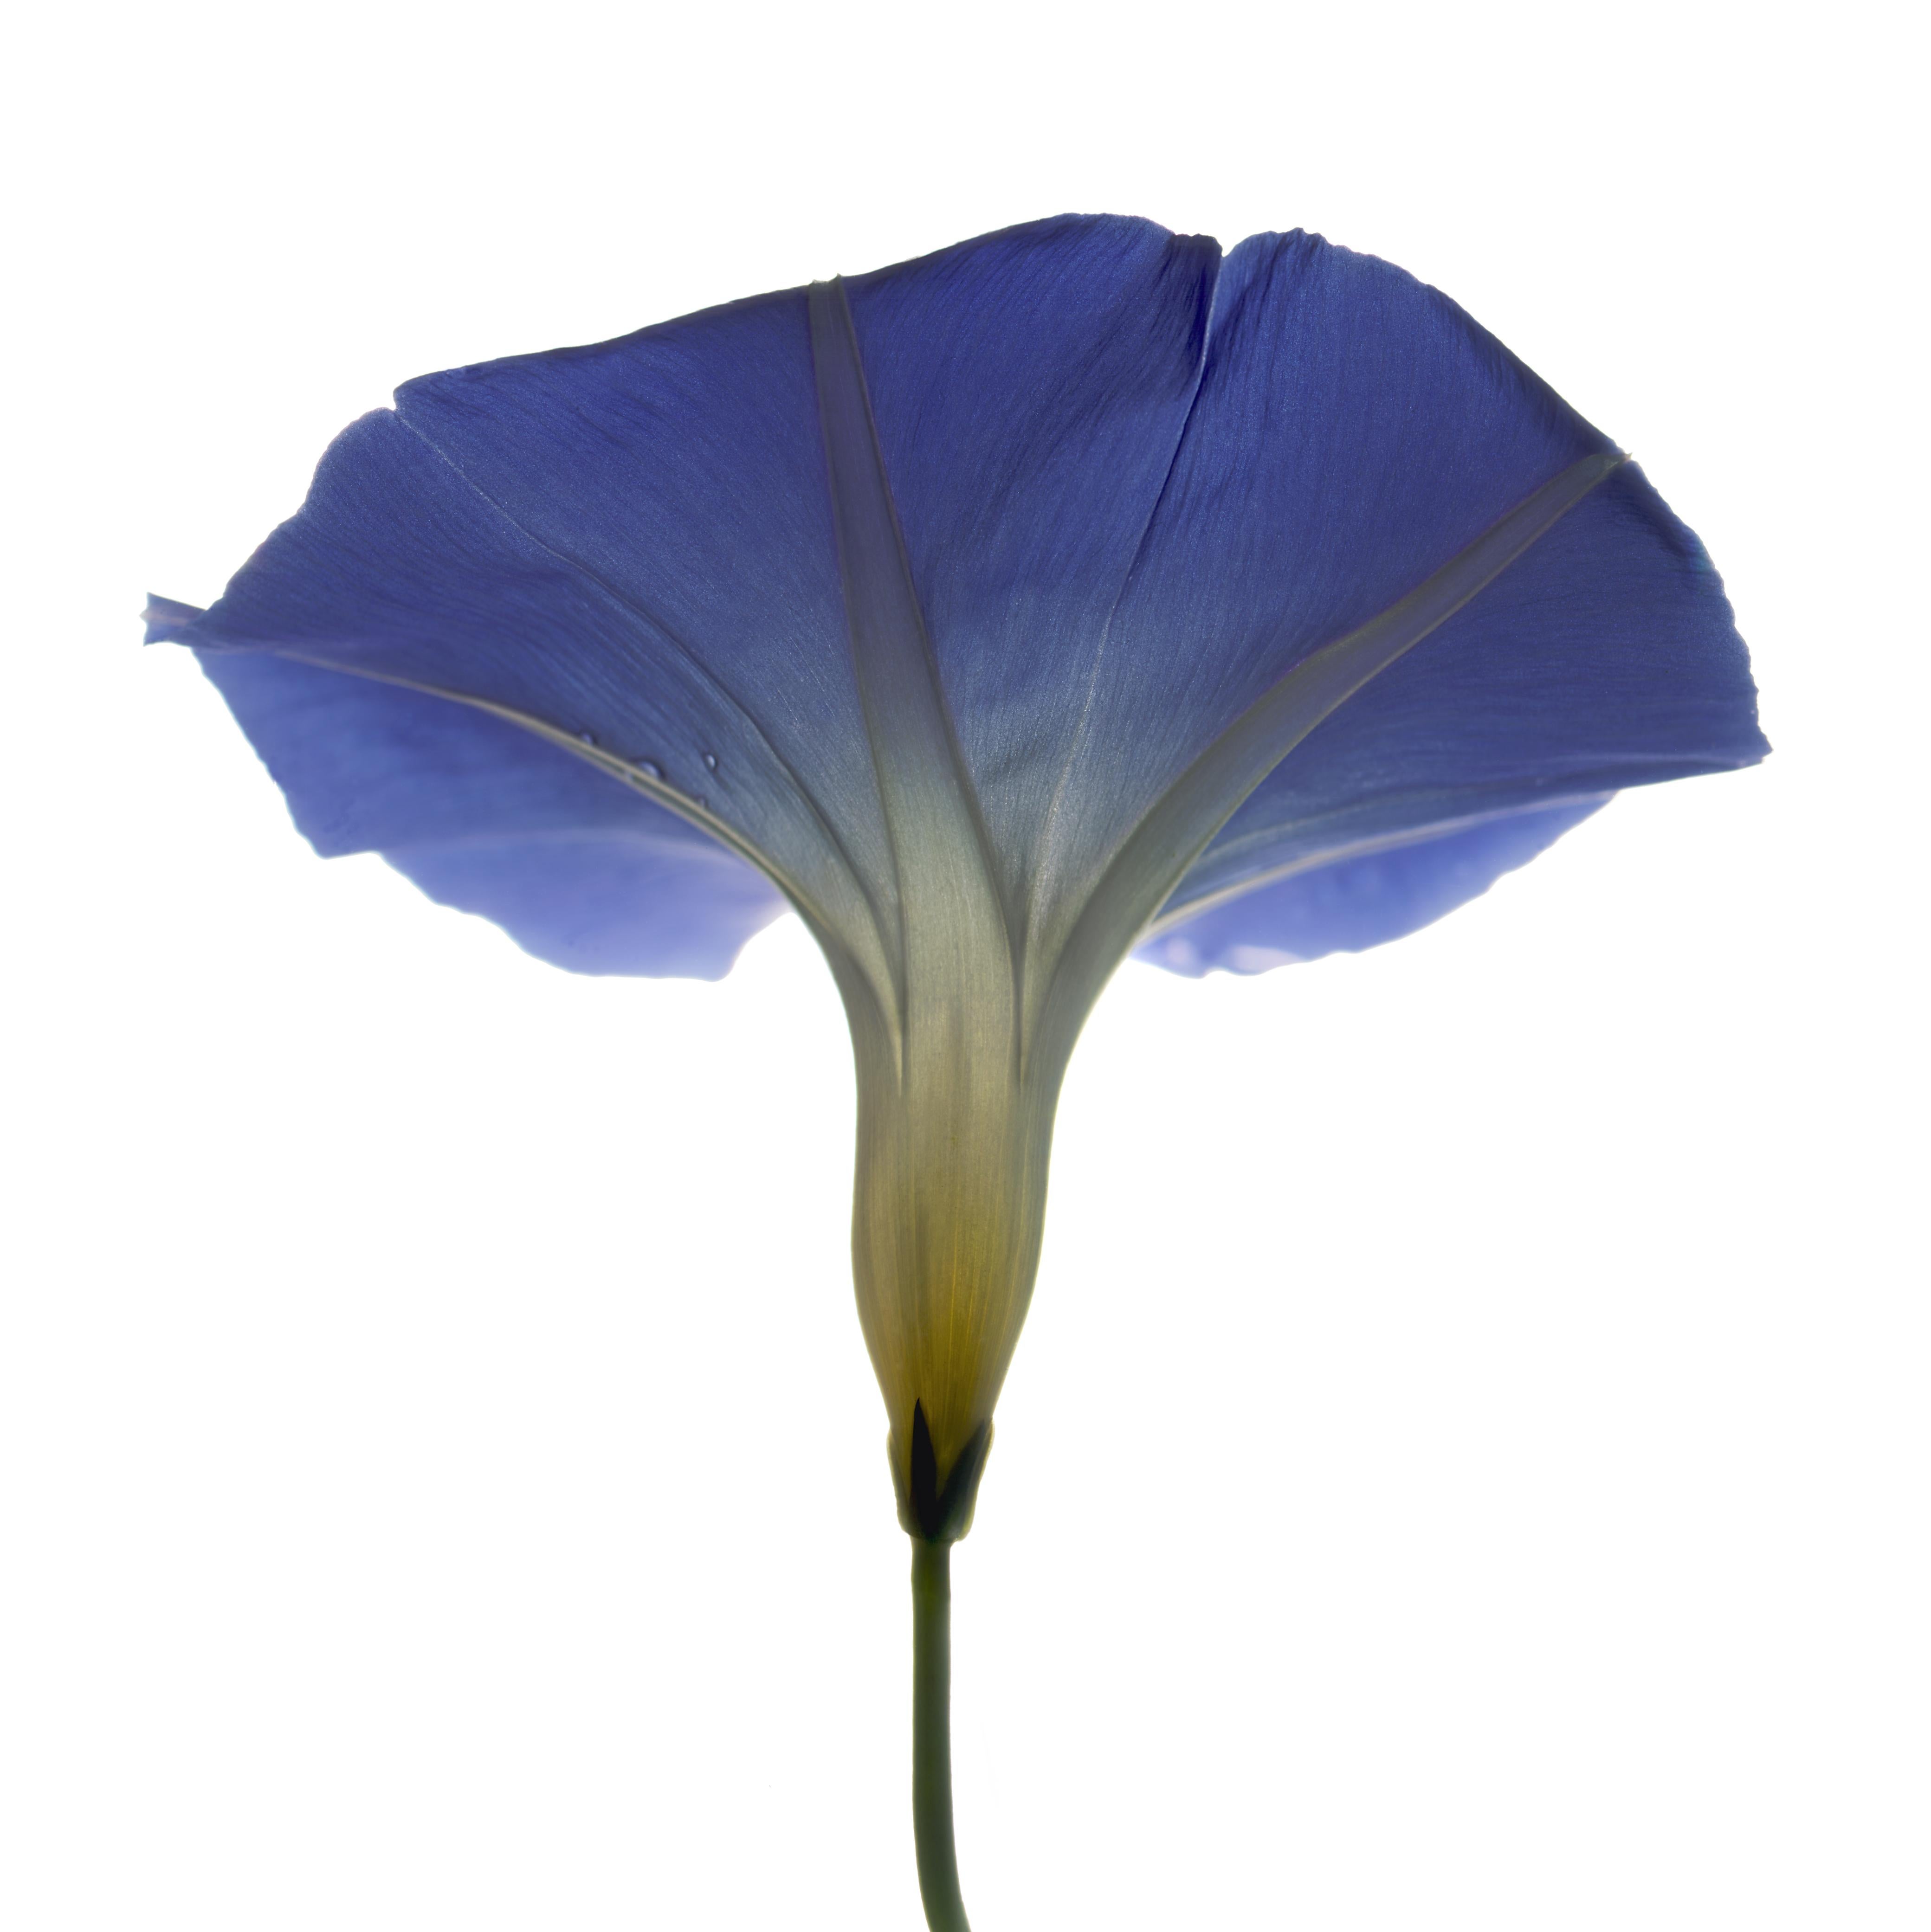 Chad Kleitsch - Untitled Flower # 141, Photography 2013, Printed After